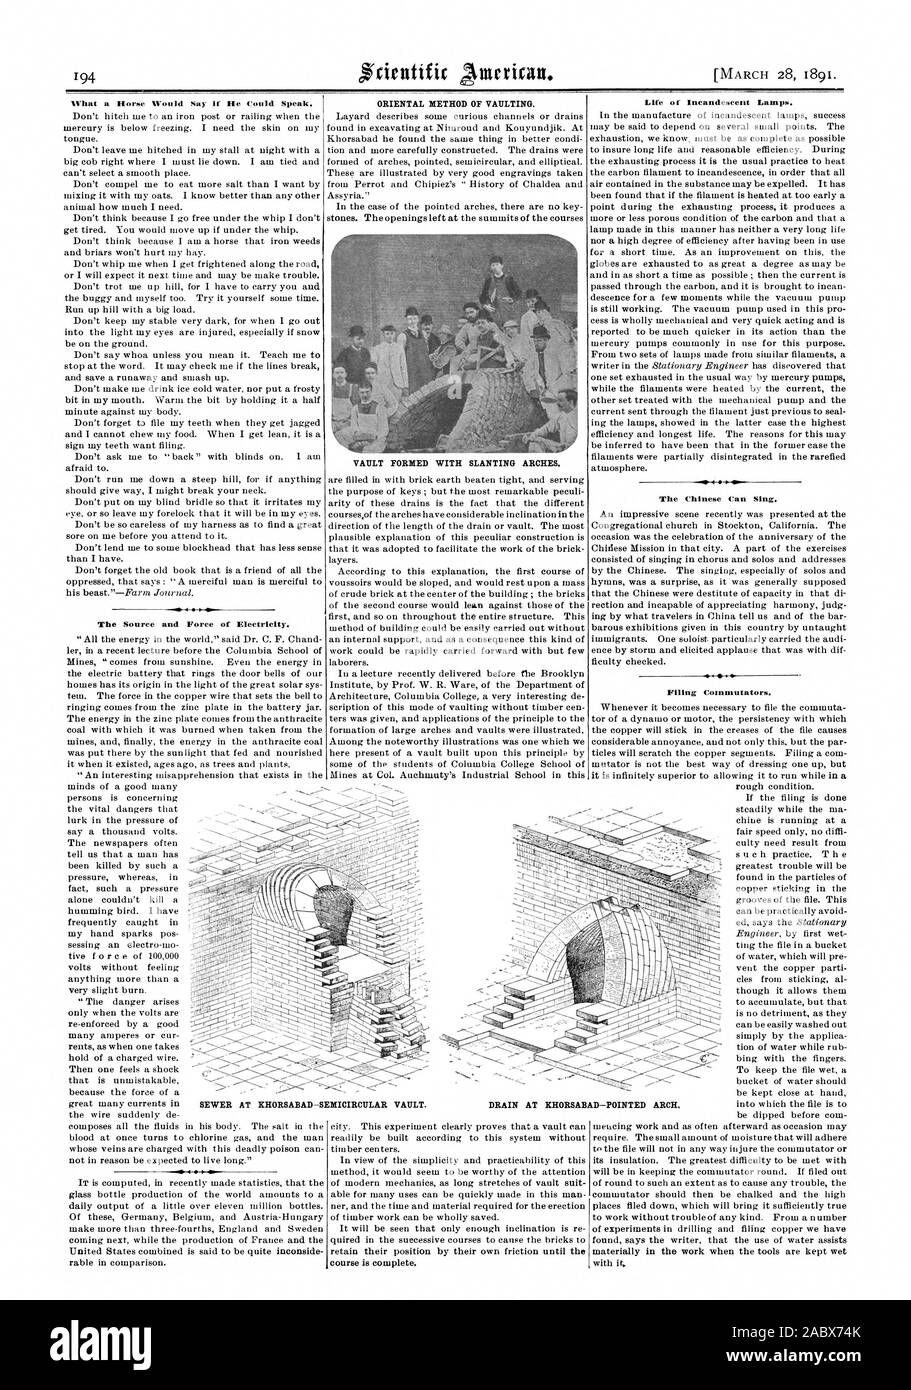 What a Horse Would Say if He Could Speak. The Source and Force of Electricity. ORIENTAL METHOD OF VAULTING. VAULT FORMED WITH SLANTING ARCHES. Life of Incandescent Lamps. The Chinese Can Sing. Filing Commutators. DRAIN AT KHORSABAD—POINTED ARCH. SEWER AT ICHORSABAD—SEMICIRCULAR VAULT., scientific american, 1891-03-28 Stock Photo